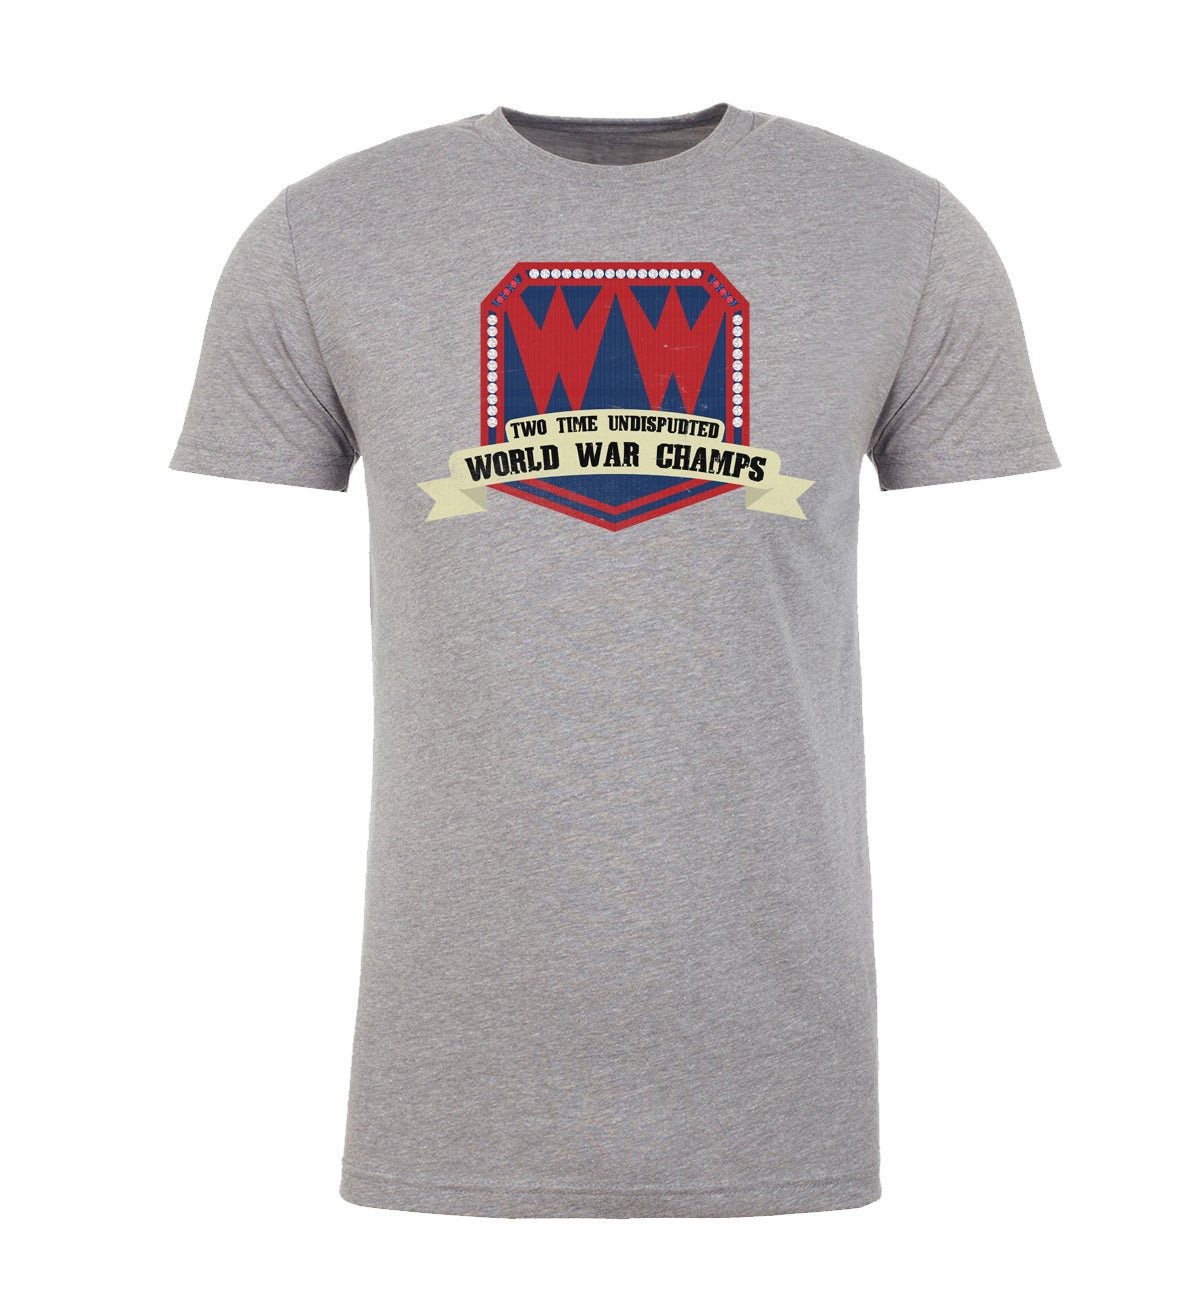 Two Time Undisputed World War Champs Unisex T Shirts - Mato & Hash